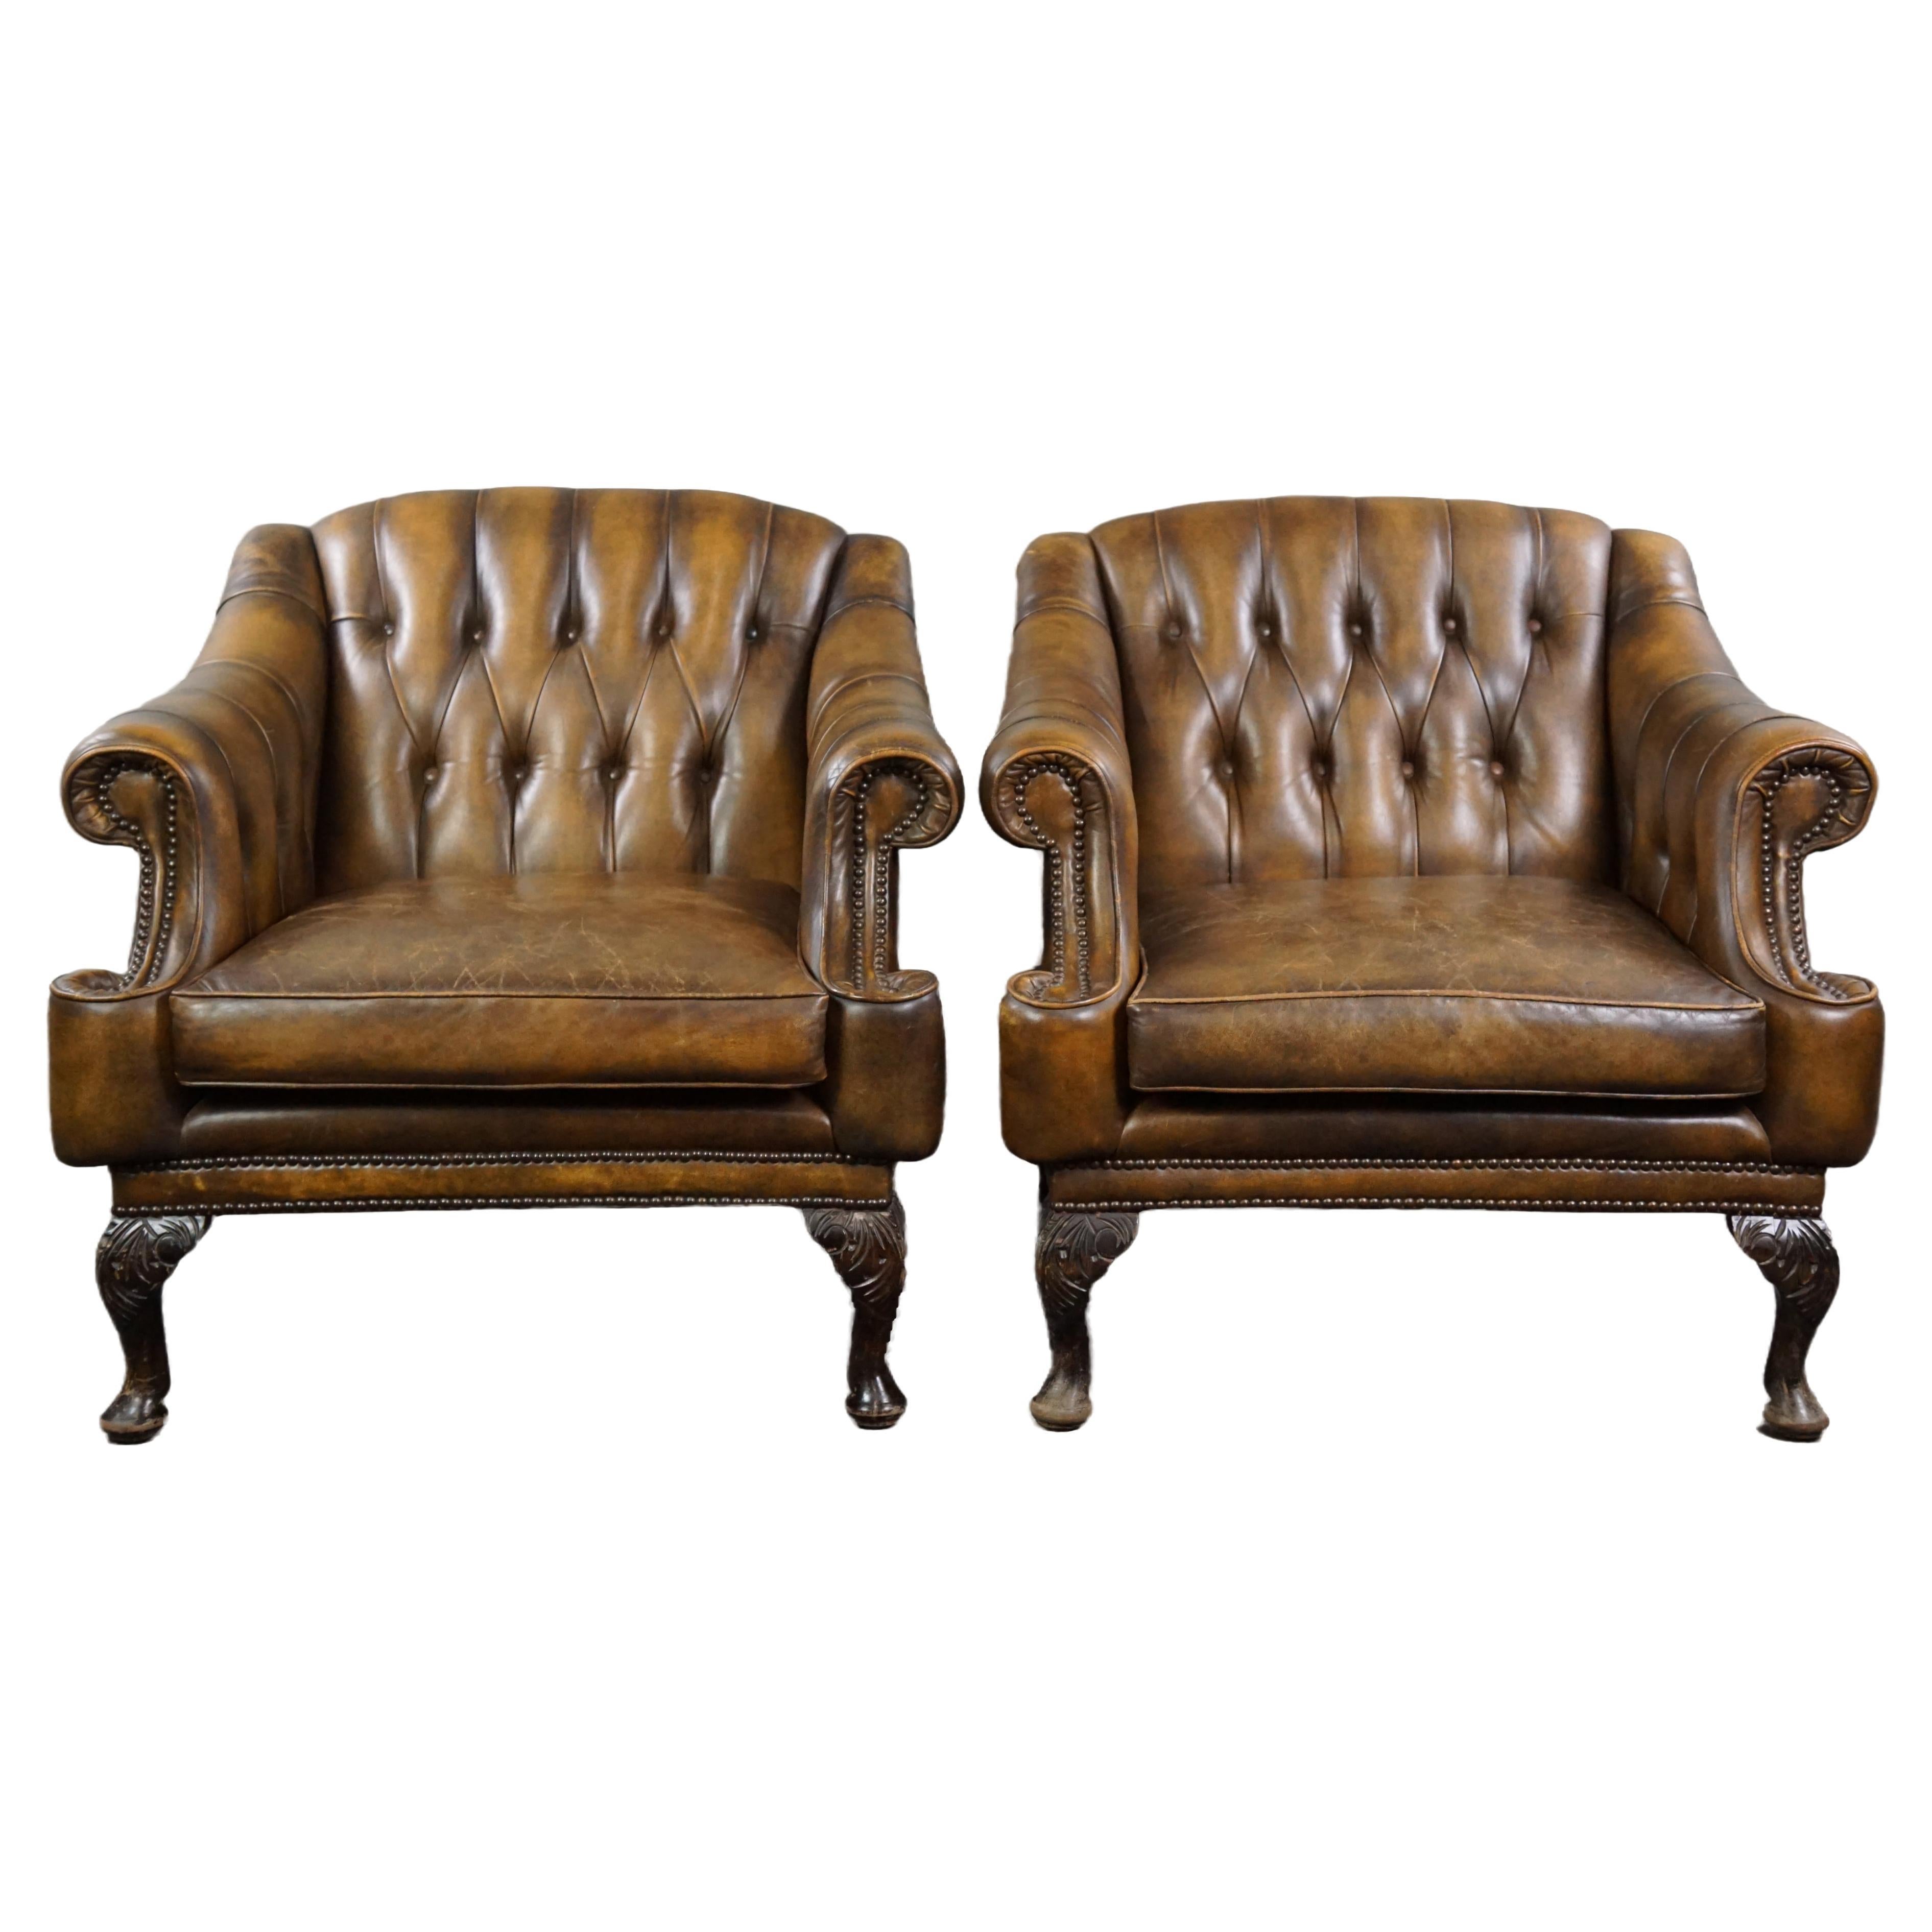 Insanely unique set of two cowhide leather Chesterfield armchairs/arm chairs For Sale